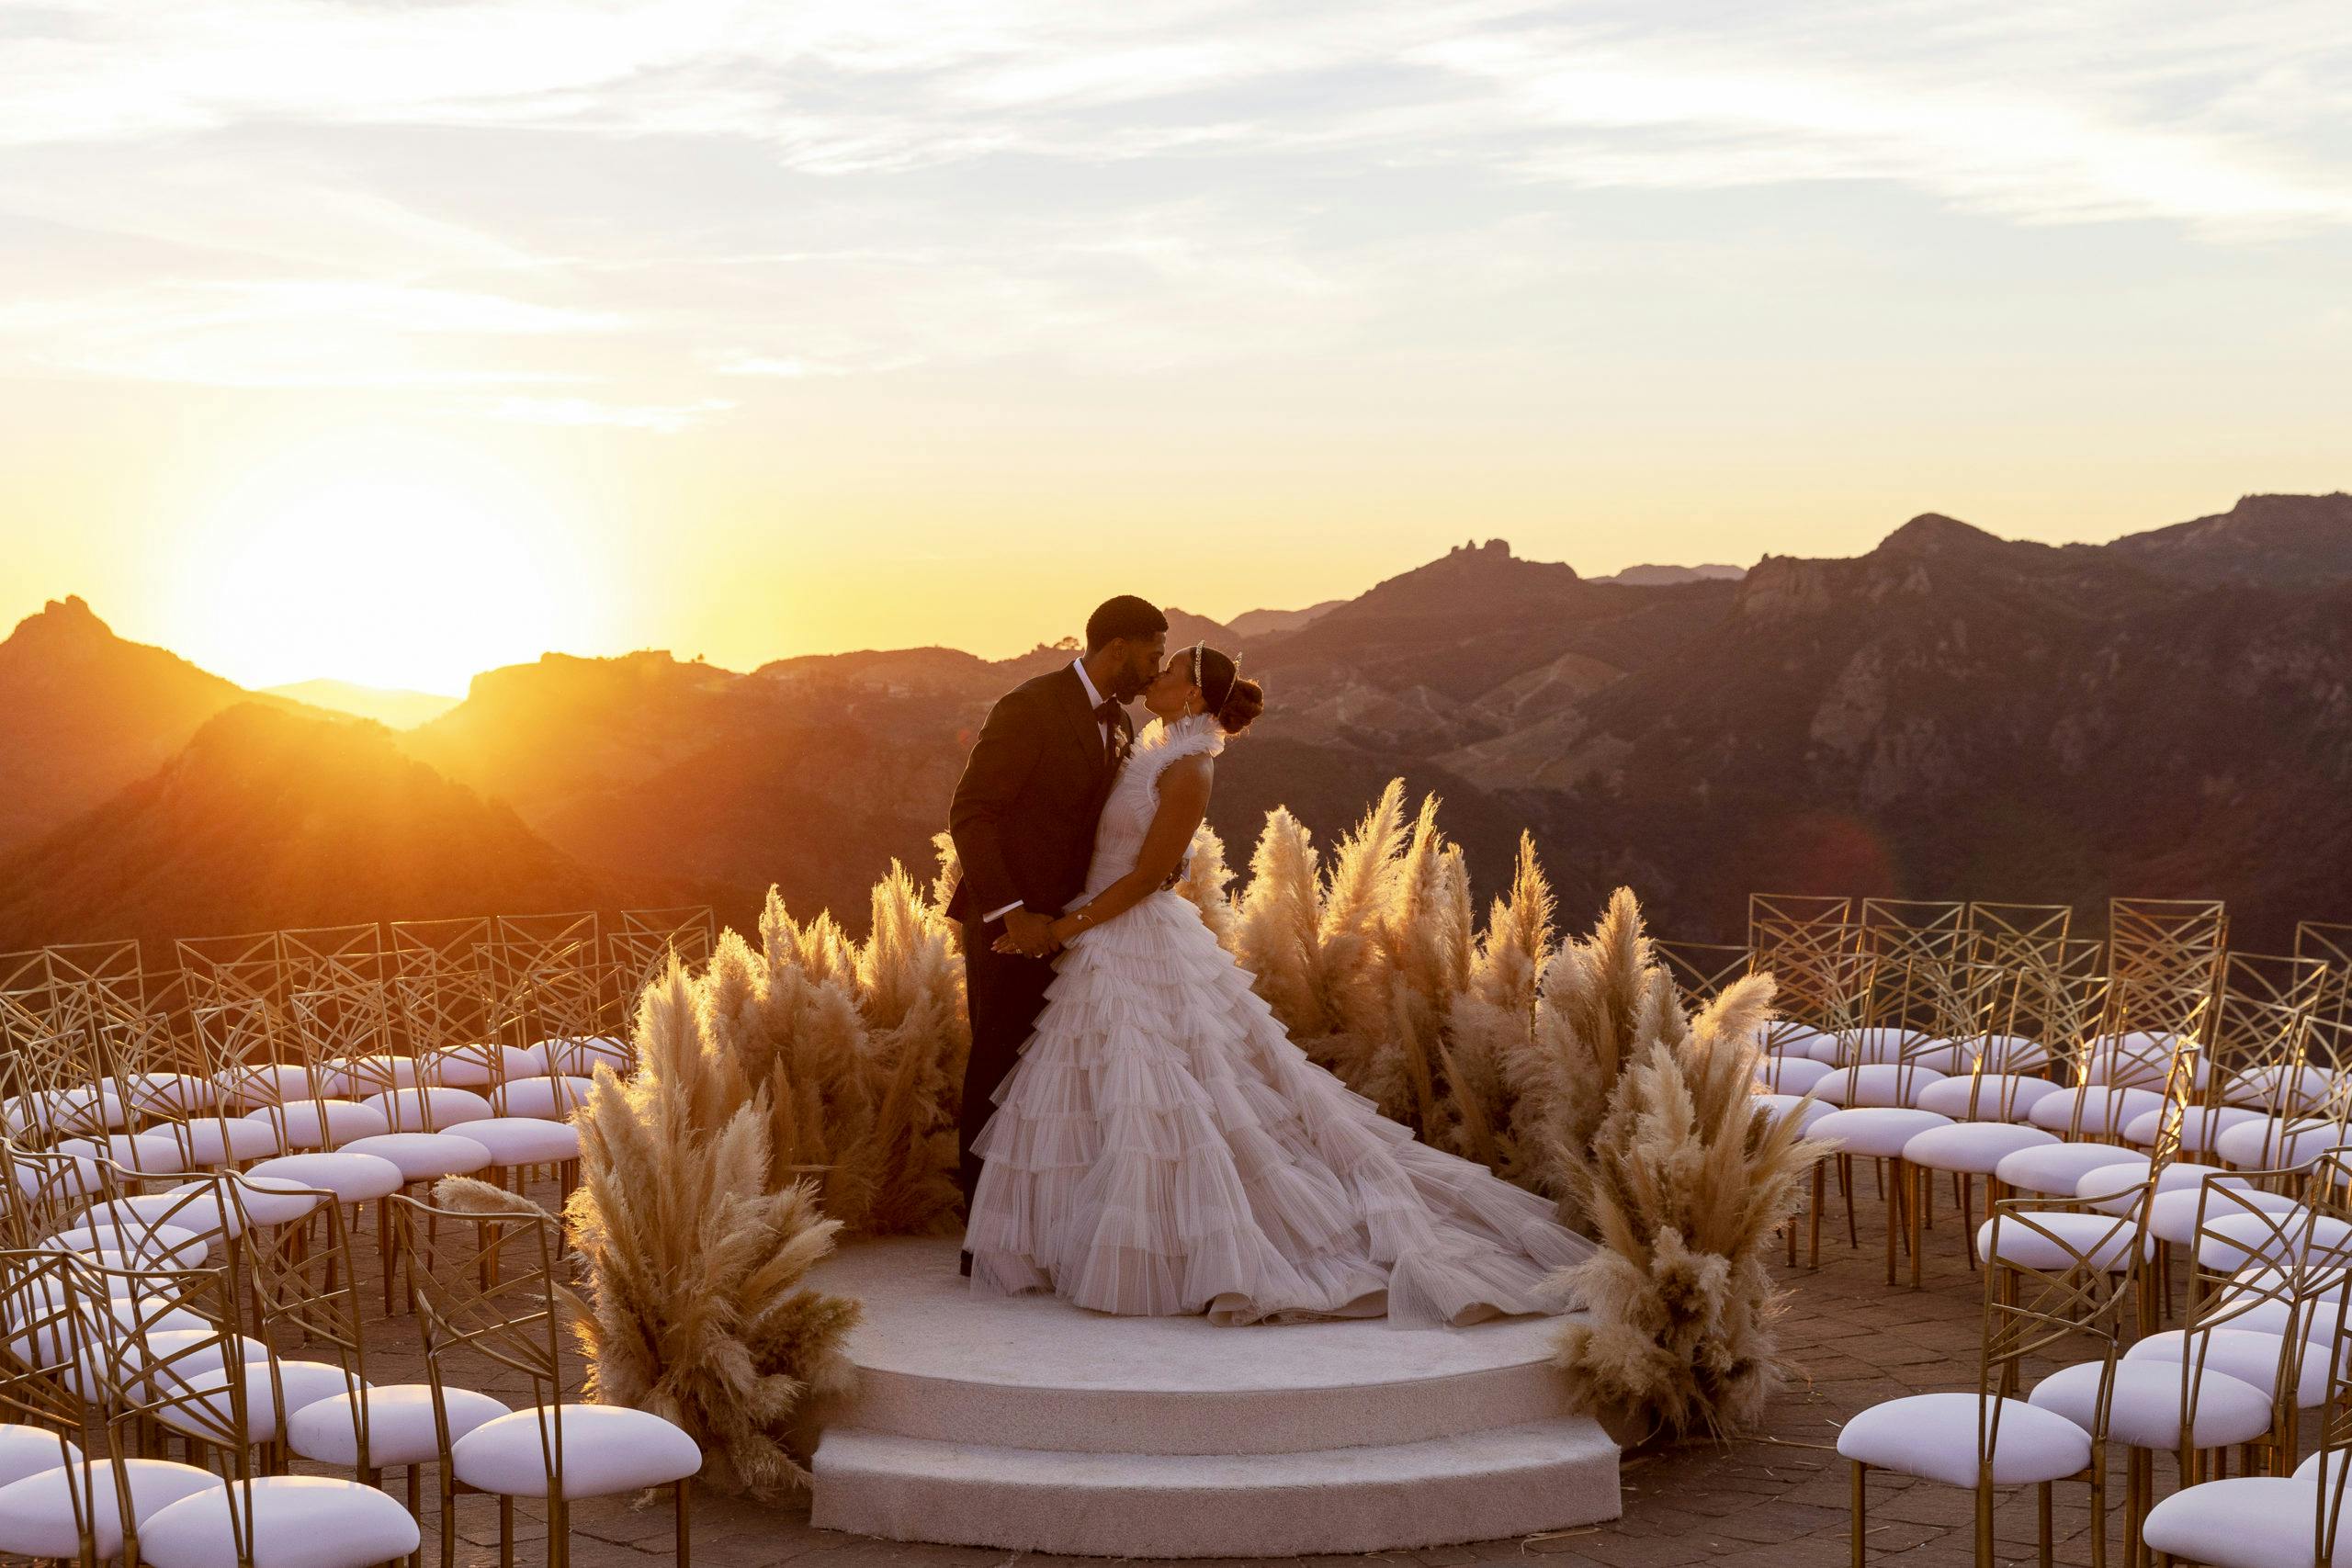 Bride and groom kissing with mountain background and sun setting | PartySlate